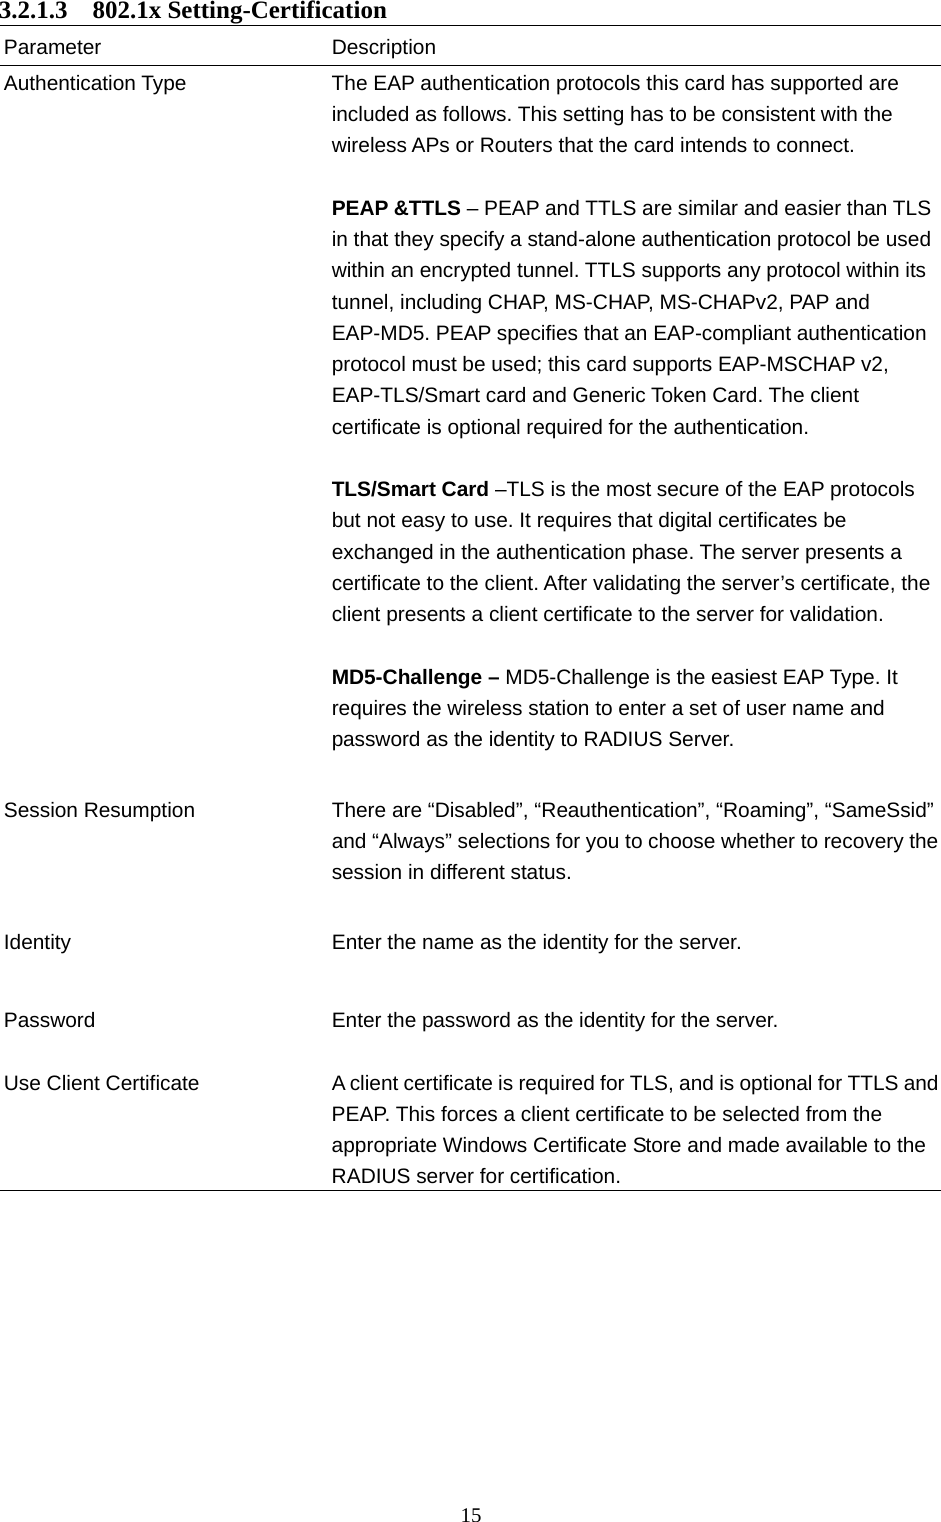  15 3.2.1.3  802.1x Setting-Certification Parameter Description Authentication Type  The EAP authentication protocols this card has supported are included as follows. This setting has to be consistent with the wireless APs or Routers that the card intends to connect.  PEAP &amp;TTLS – PEAP and TTLS are similar and easier than TLS in that they specify a stand-alone authentication protocol be used within an encrypted tunnel. TTLS supports any protocol within its tunnel, including CHAP, MS-CHAP, MS-CHAPv2, PAP and EAP-MD5. PEAP specifies that an EAP-compliant authentication protocol must be used; this card supports EAP-MSCHAP v2, EAP-TLS/Smart card and Generic Token Card. The client certificate is optional required for the authentication.  TLS/Smart Card –TLS is the most secure of the EAP protocols but not easy to use. It requires that digital certificates be exchanged in the authentication phase. The server presents a certificate to the client. After validating the server’s certificate, the client presents a client certificate to the server for validation.    MD5-Challenge – MD5-Challenge is the easiest EAP Type. It requires the wireless station to enter a set of user name and password as the identity to RADIUS Server.   Session Resumption  There are “Disabled”, “Reauthentication”, “Roaming”, “SameSsid” and “Always” selections for you to choose whether to recovery the session in different status.   Identity  Enter the name as the identity for the server.   Password  Enter the password as the identity for the server. Use Client Certificate A client certificate is required for TLS, and is optional for TTLS and PEAP. This forces a client certificate to be selected from the appropriate Windows Certificate Store and made available to the RADIUS server for certification.          